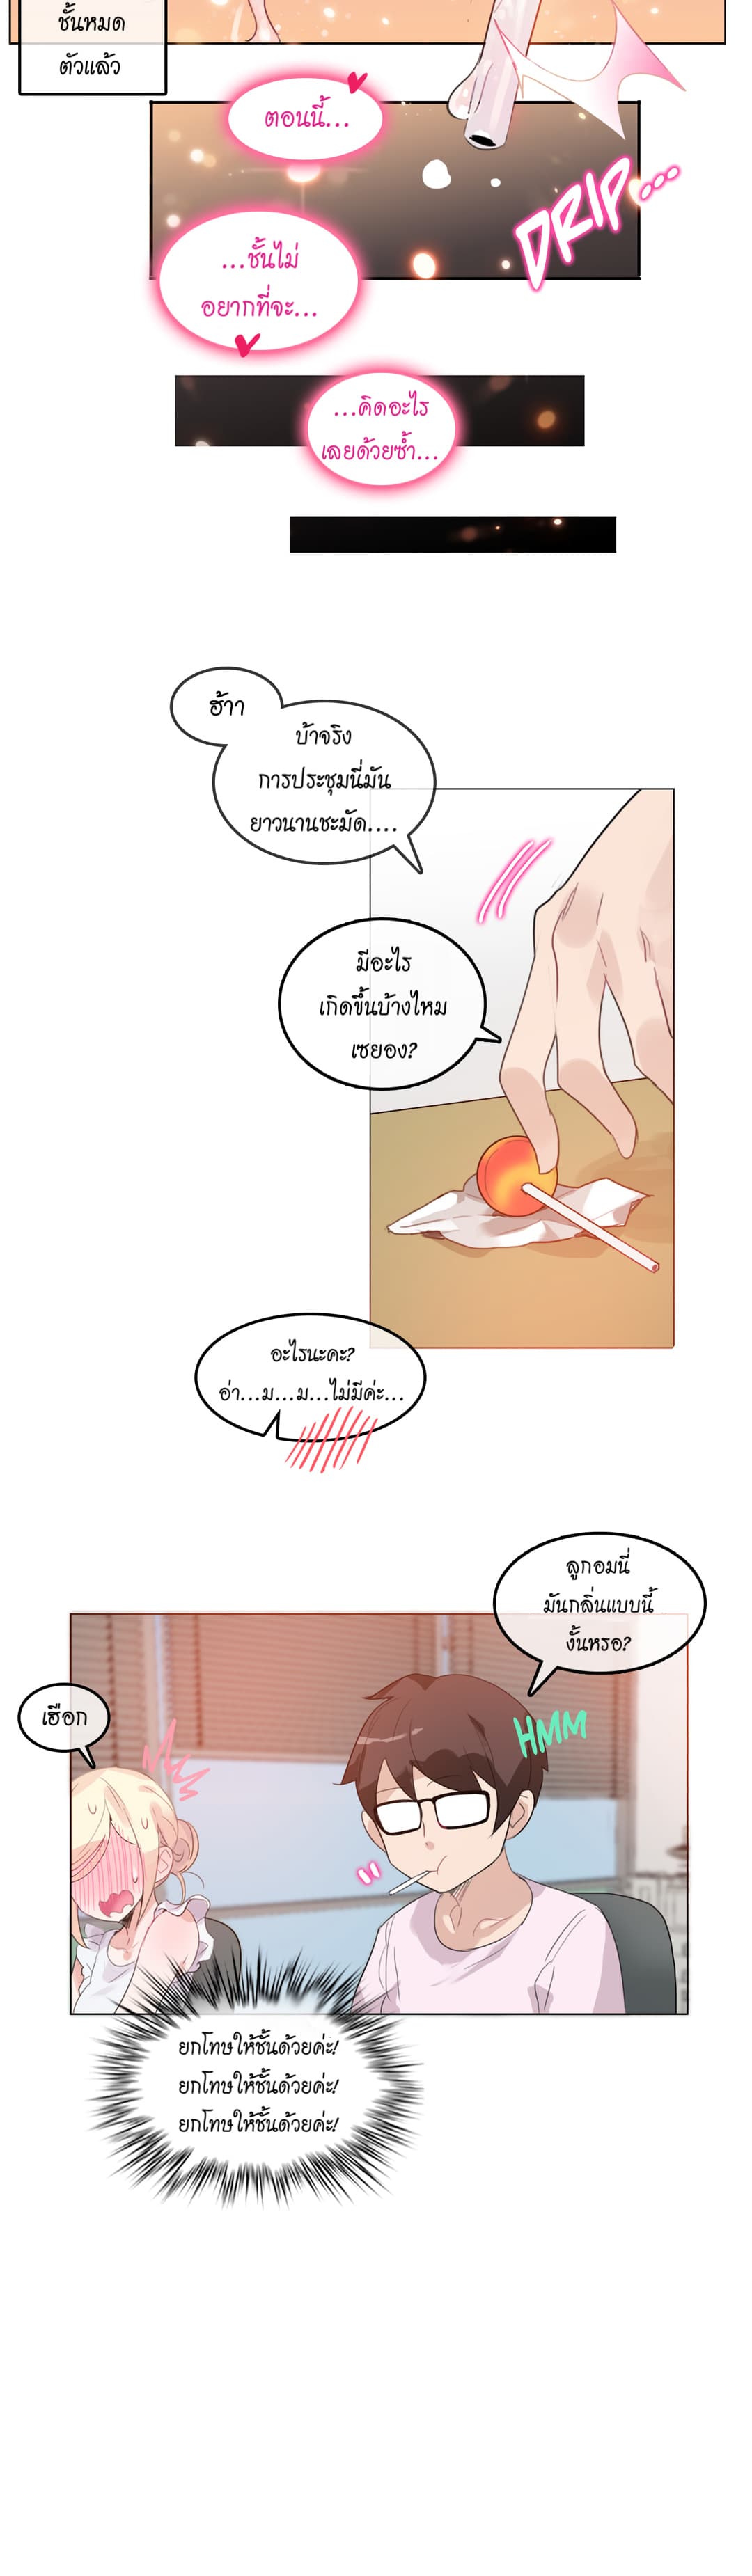 A Pervert’s Daily Life 16 (17)